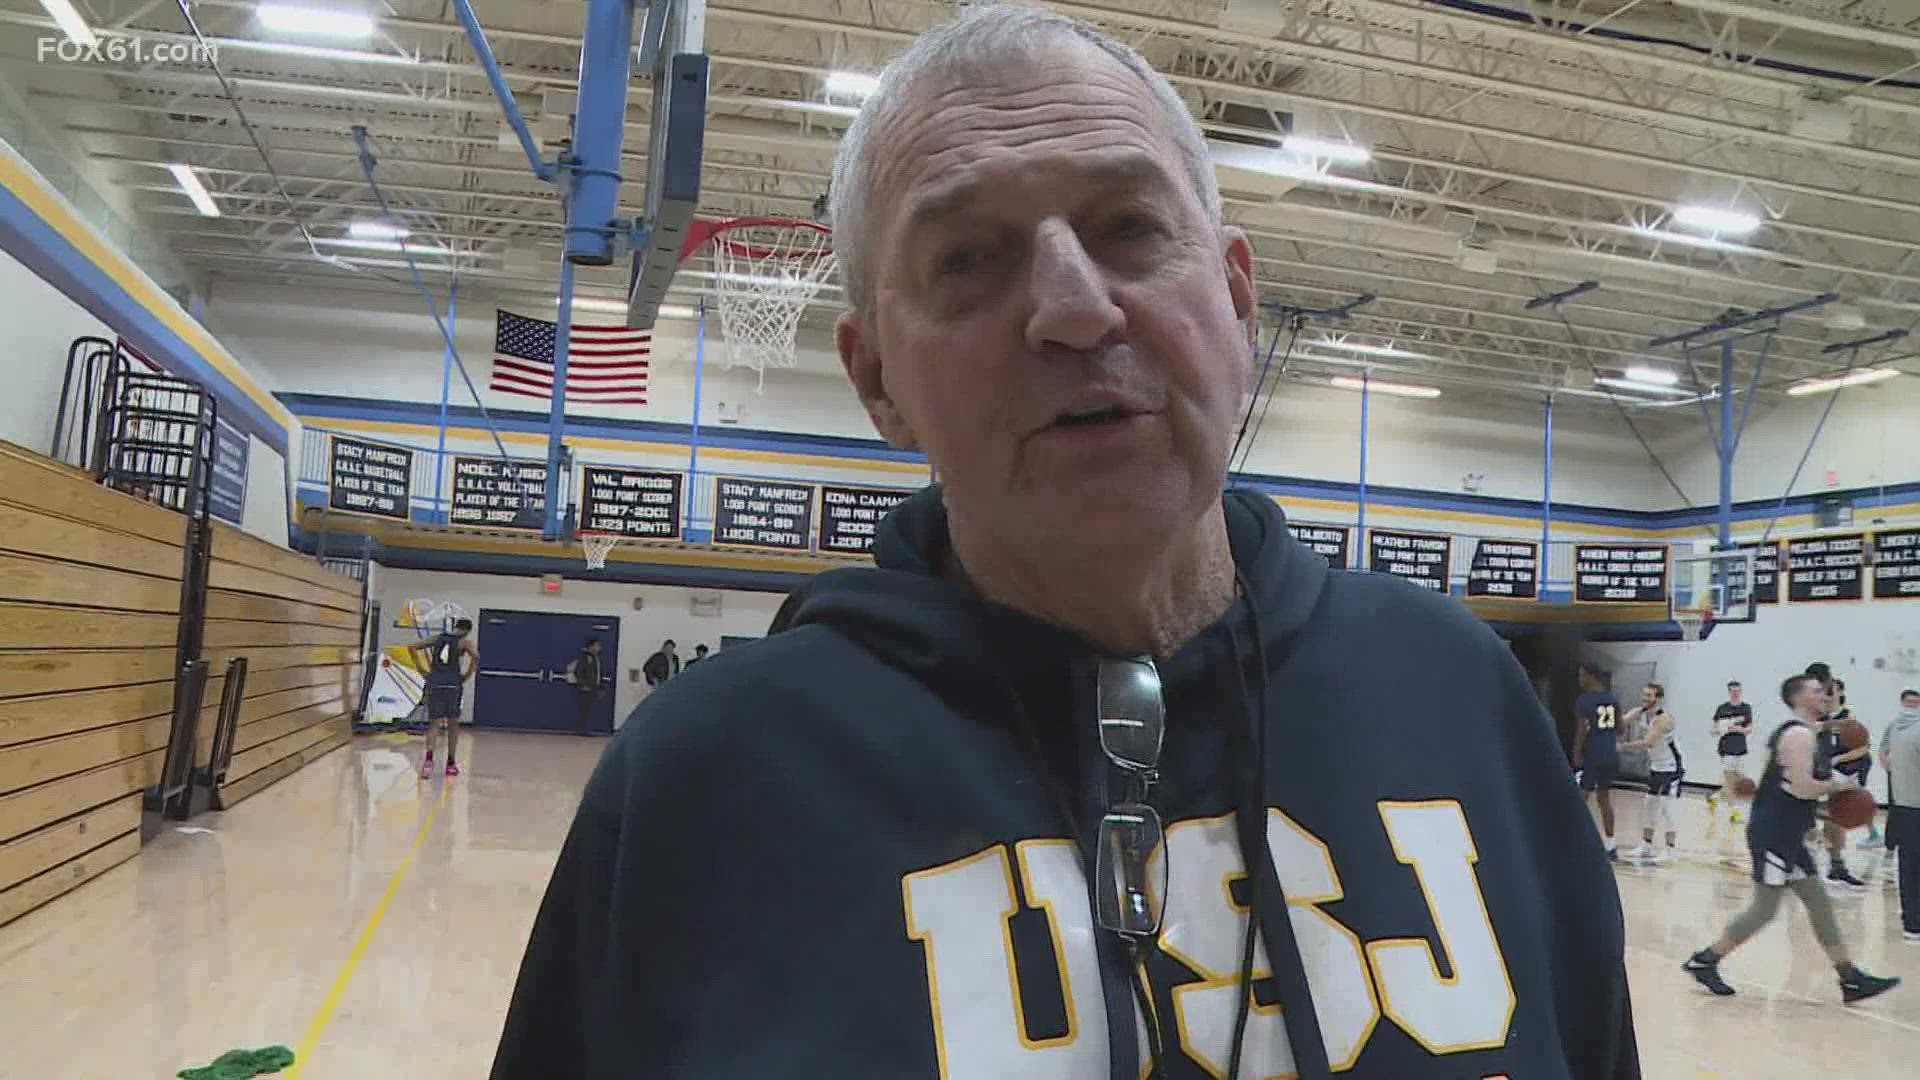 Hall of Famer Jim Calhoun says it is the right time to retire and spend time with his family.